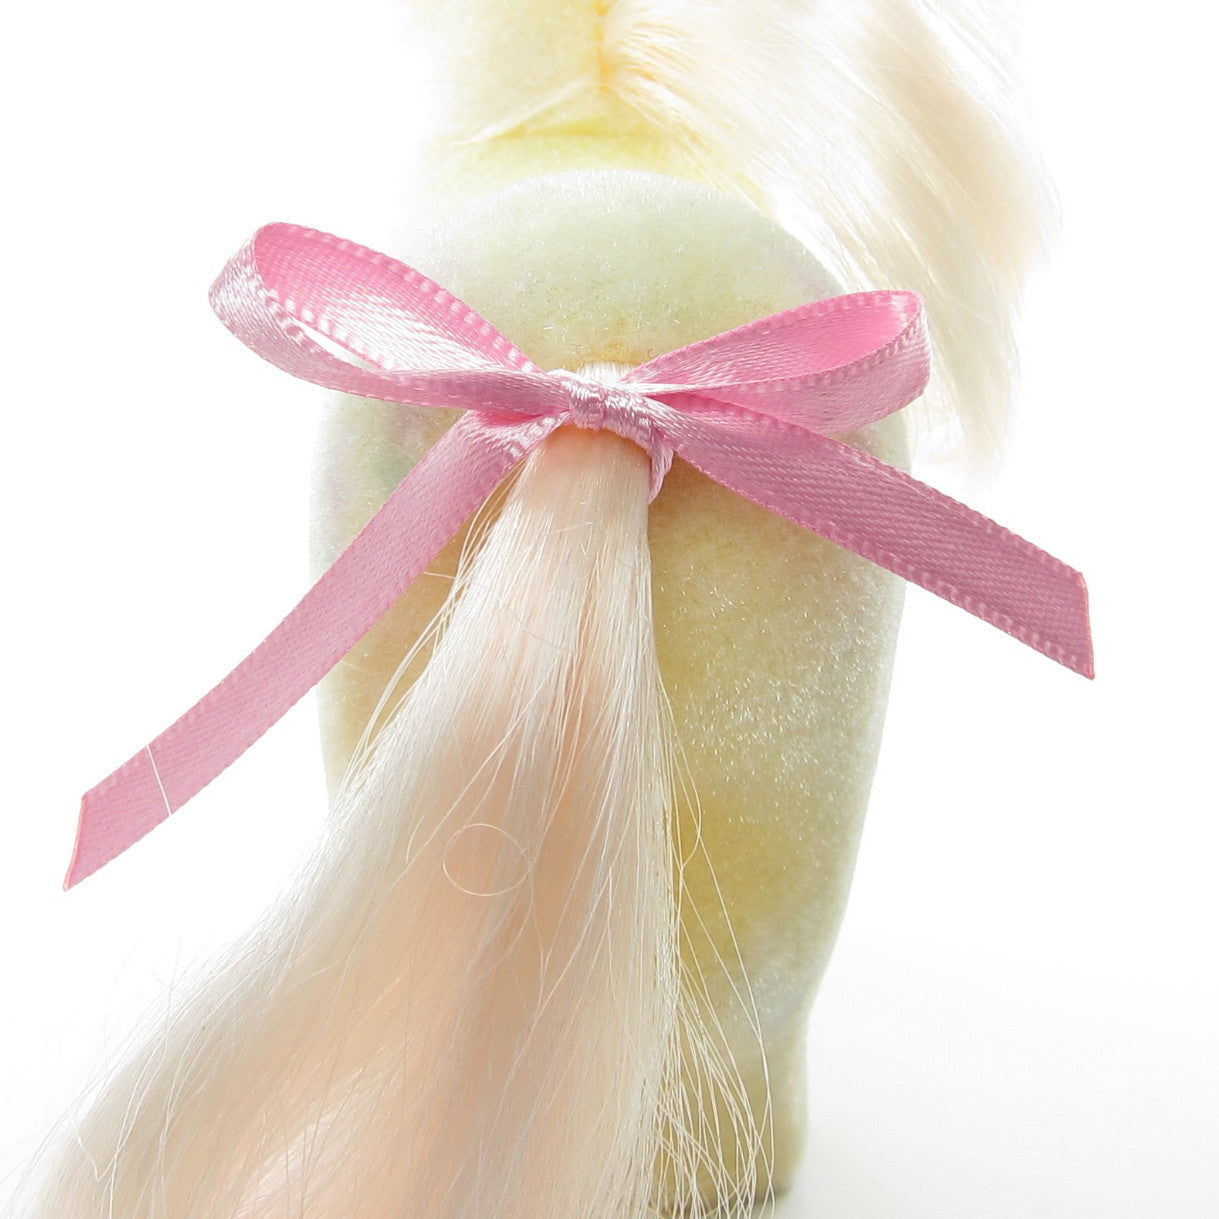 Replacement Pony Hair Ribbons for G1 My Little Ponies - Pink